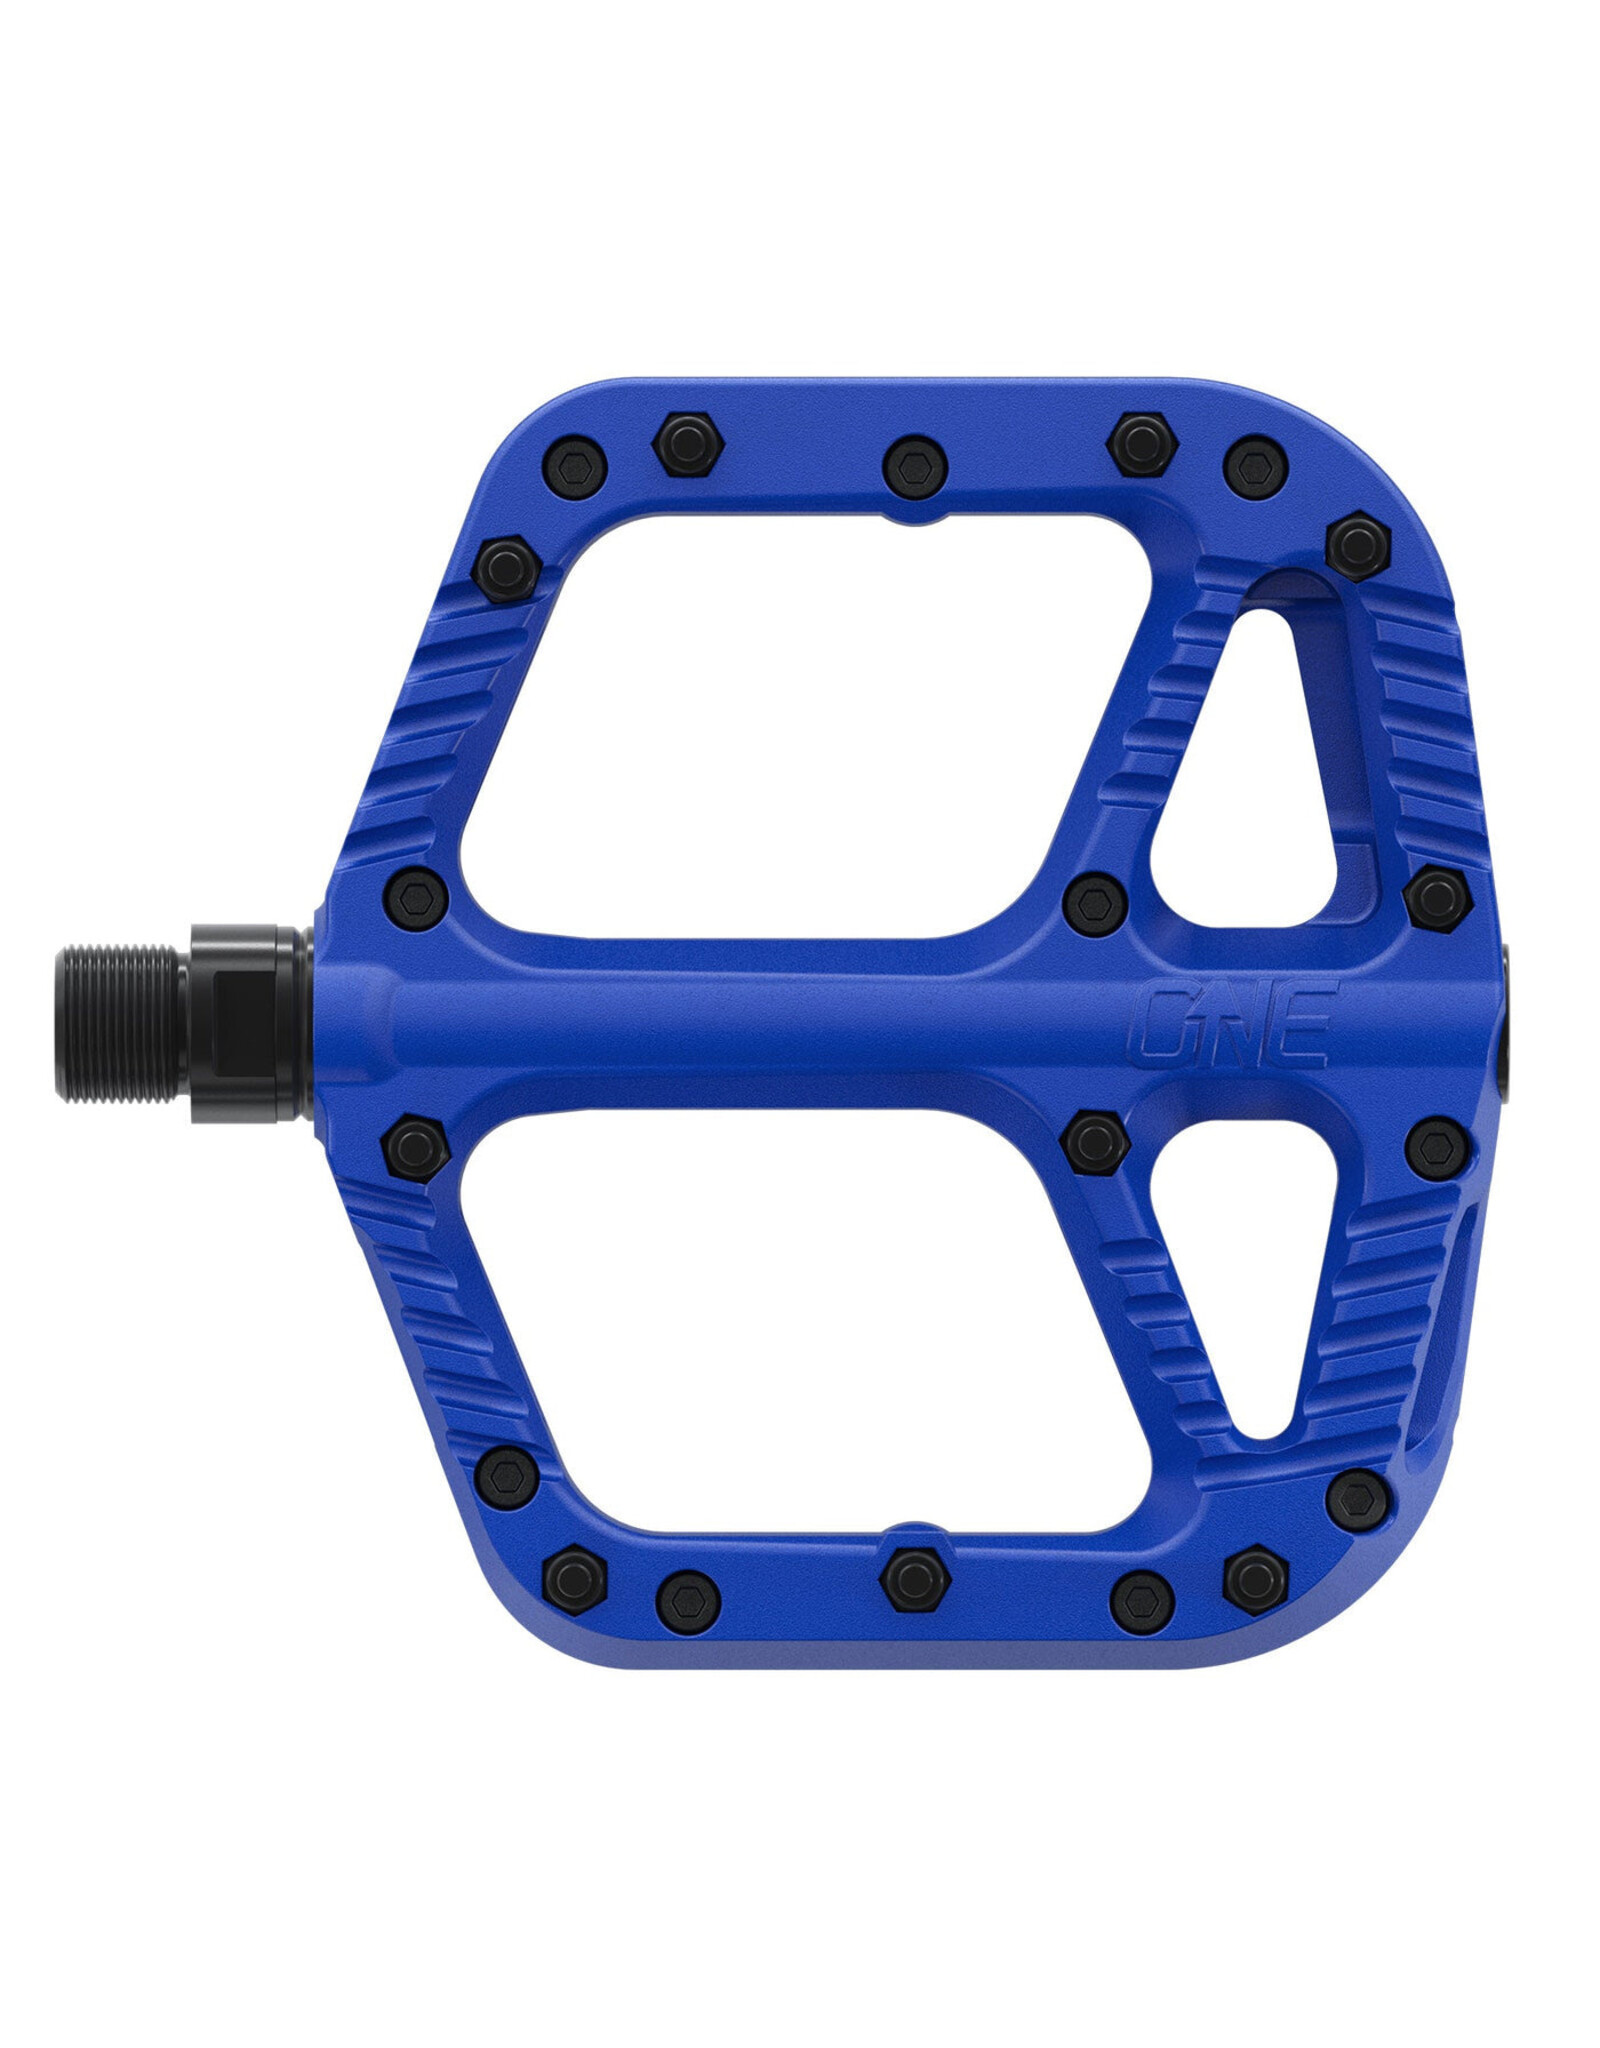 OneUp Components OneUp Components Composite Pedals